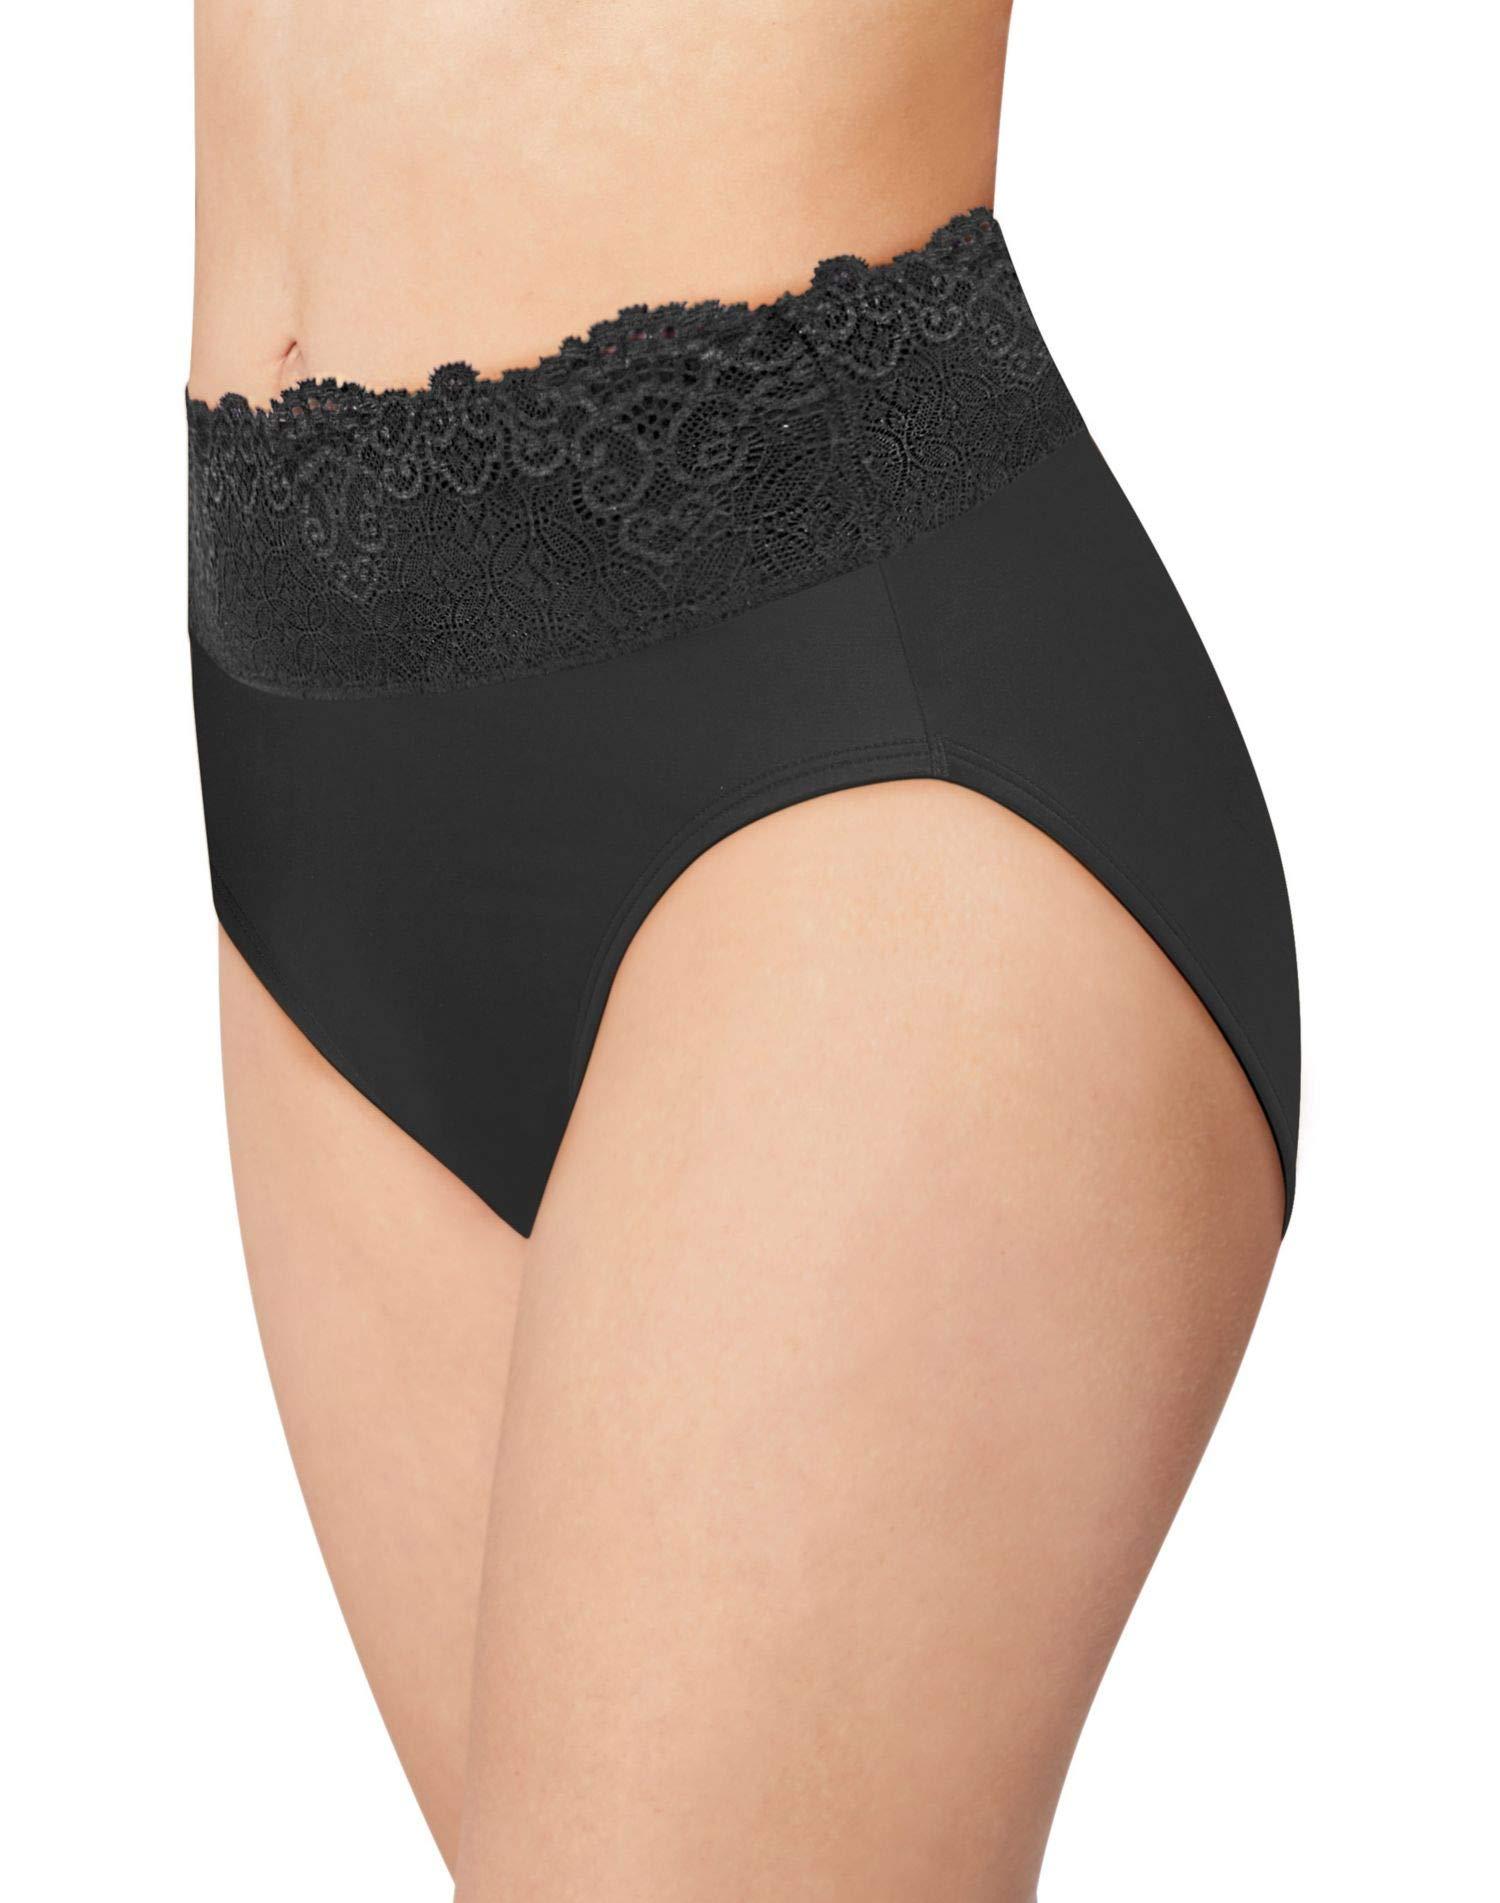 SPANX Undie-tectable® Lace Hi-Hipster Panty - Macy's